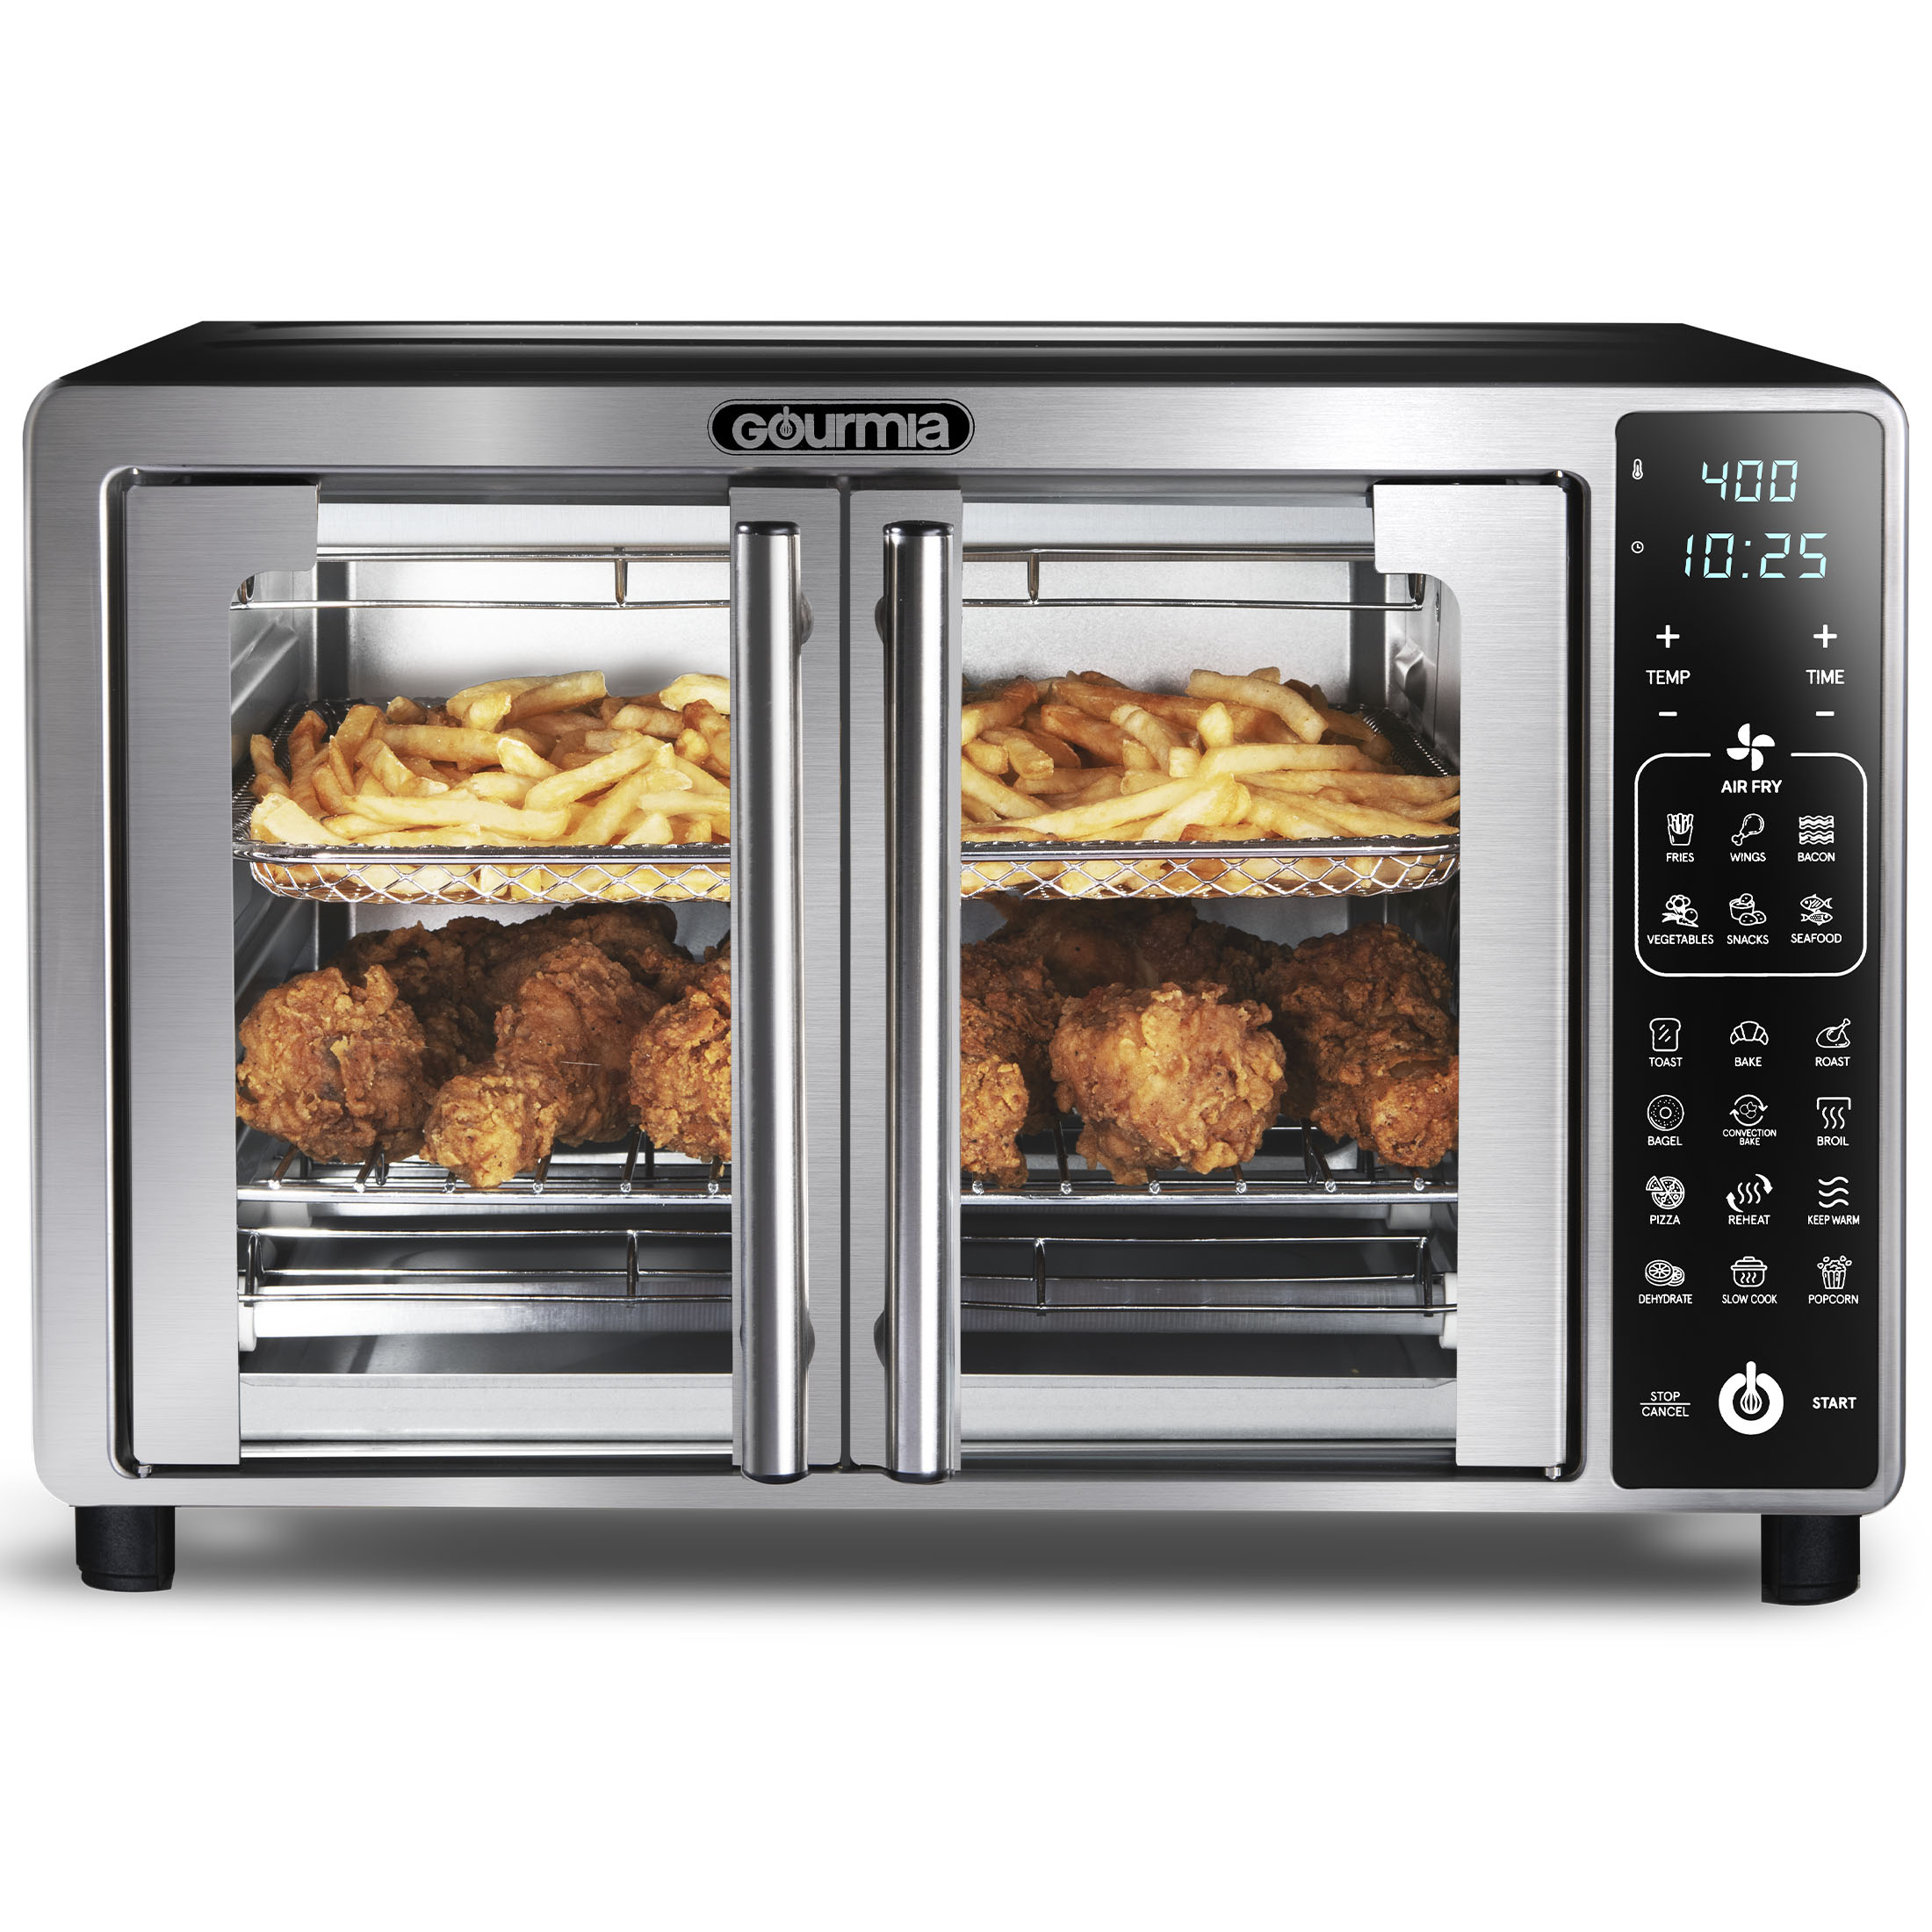 Gourmia Digital Air Fryer Toaster Oven with Single-Pull French Doors, New - image 1 of 7